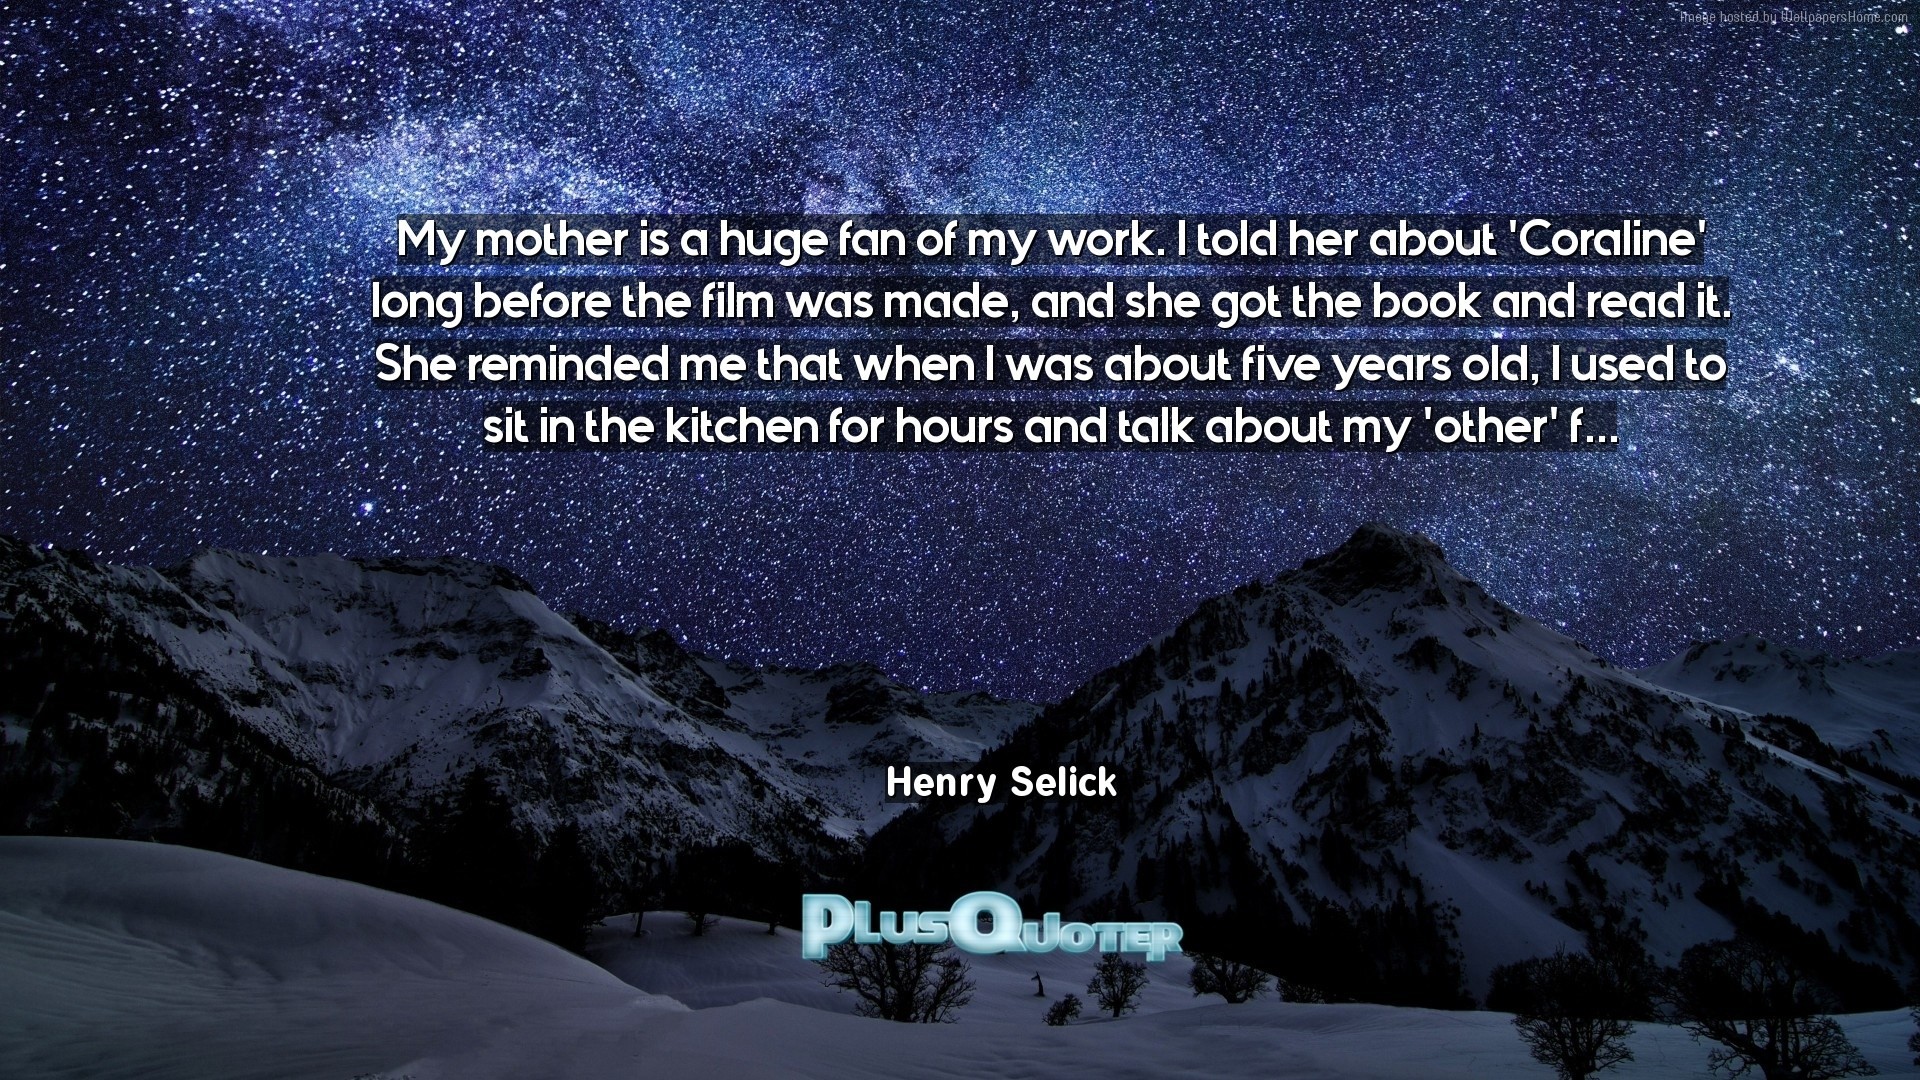 1920x1080 Download Wallpaper with inspirational Quotes- "My mother is a huge fan of  my work